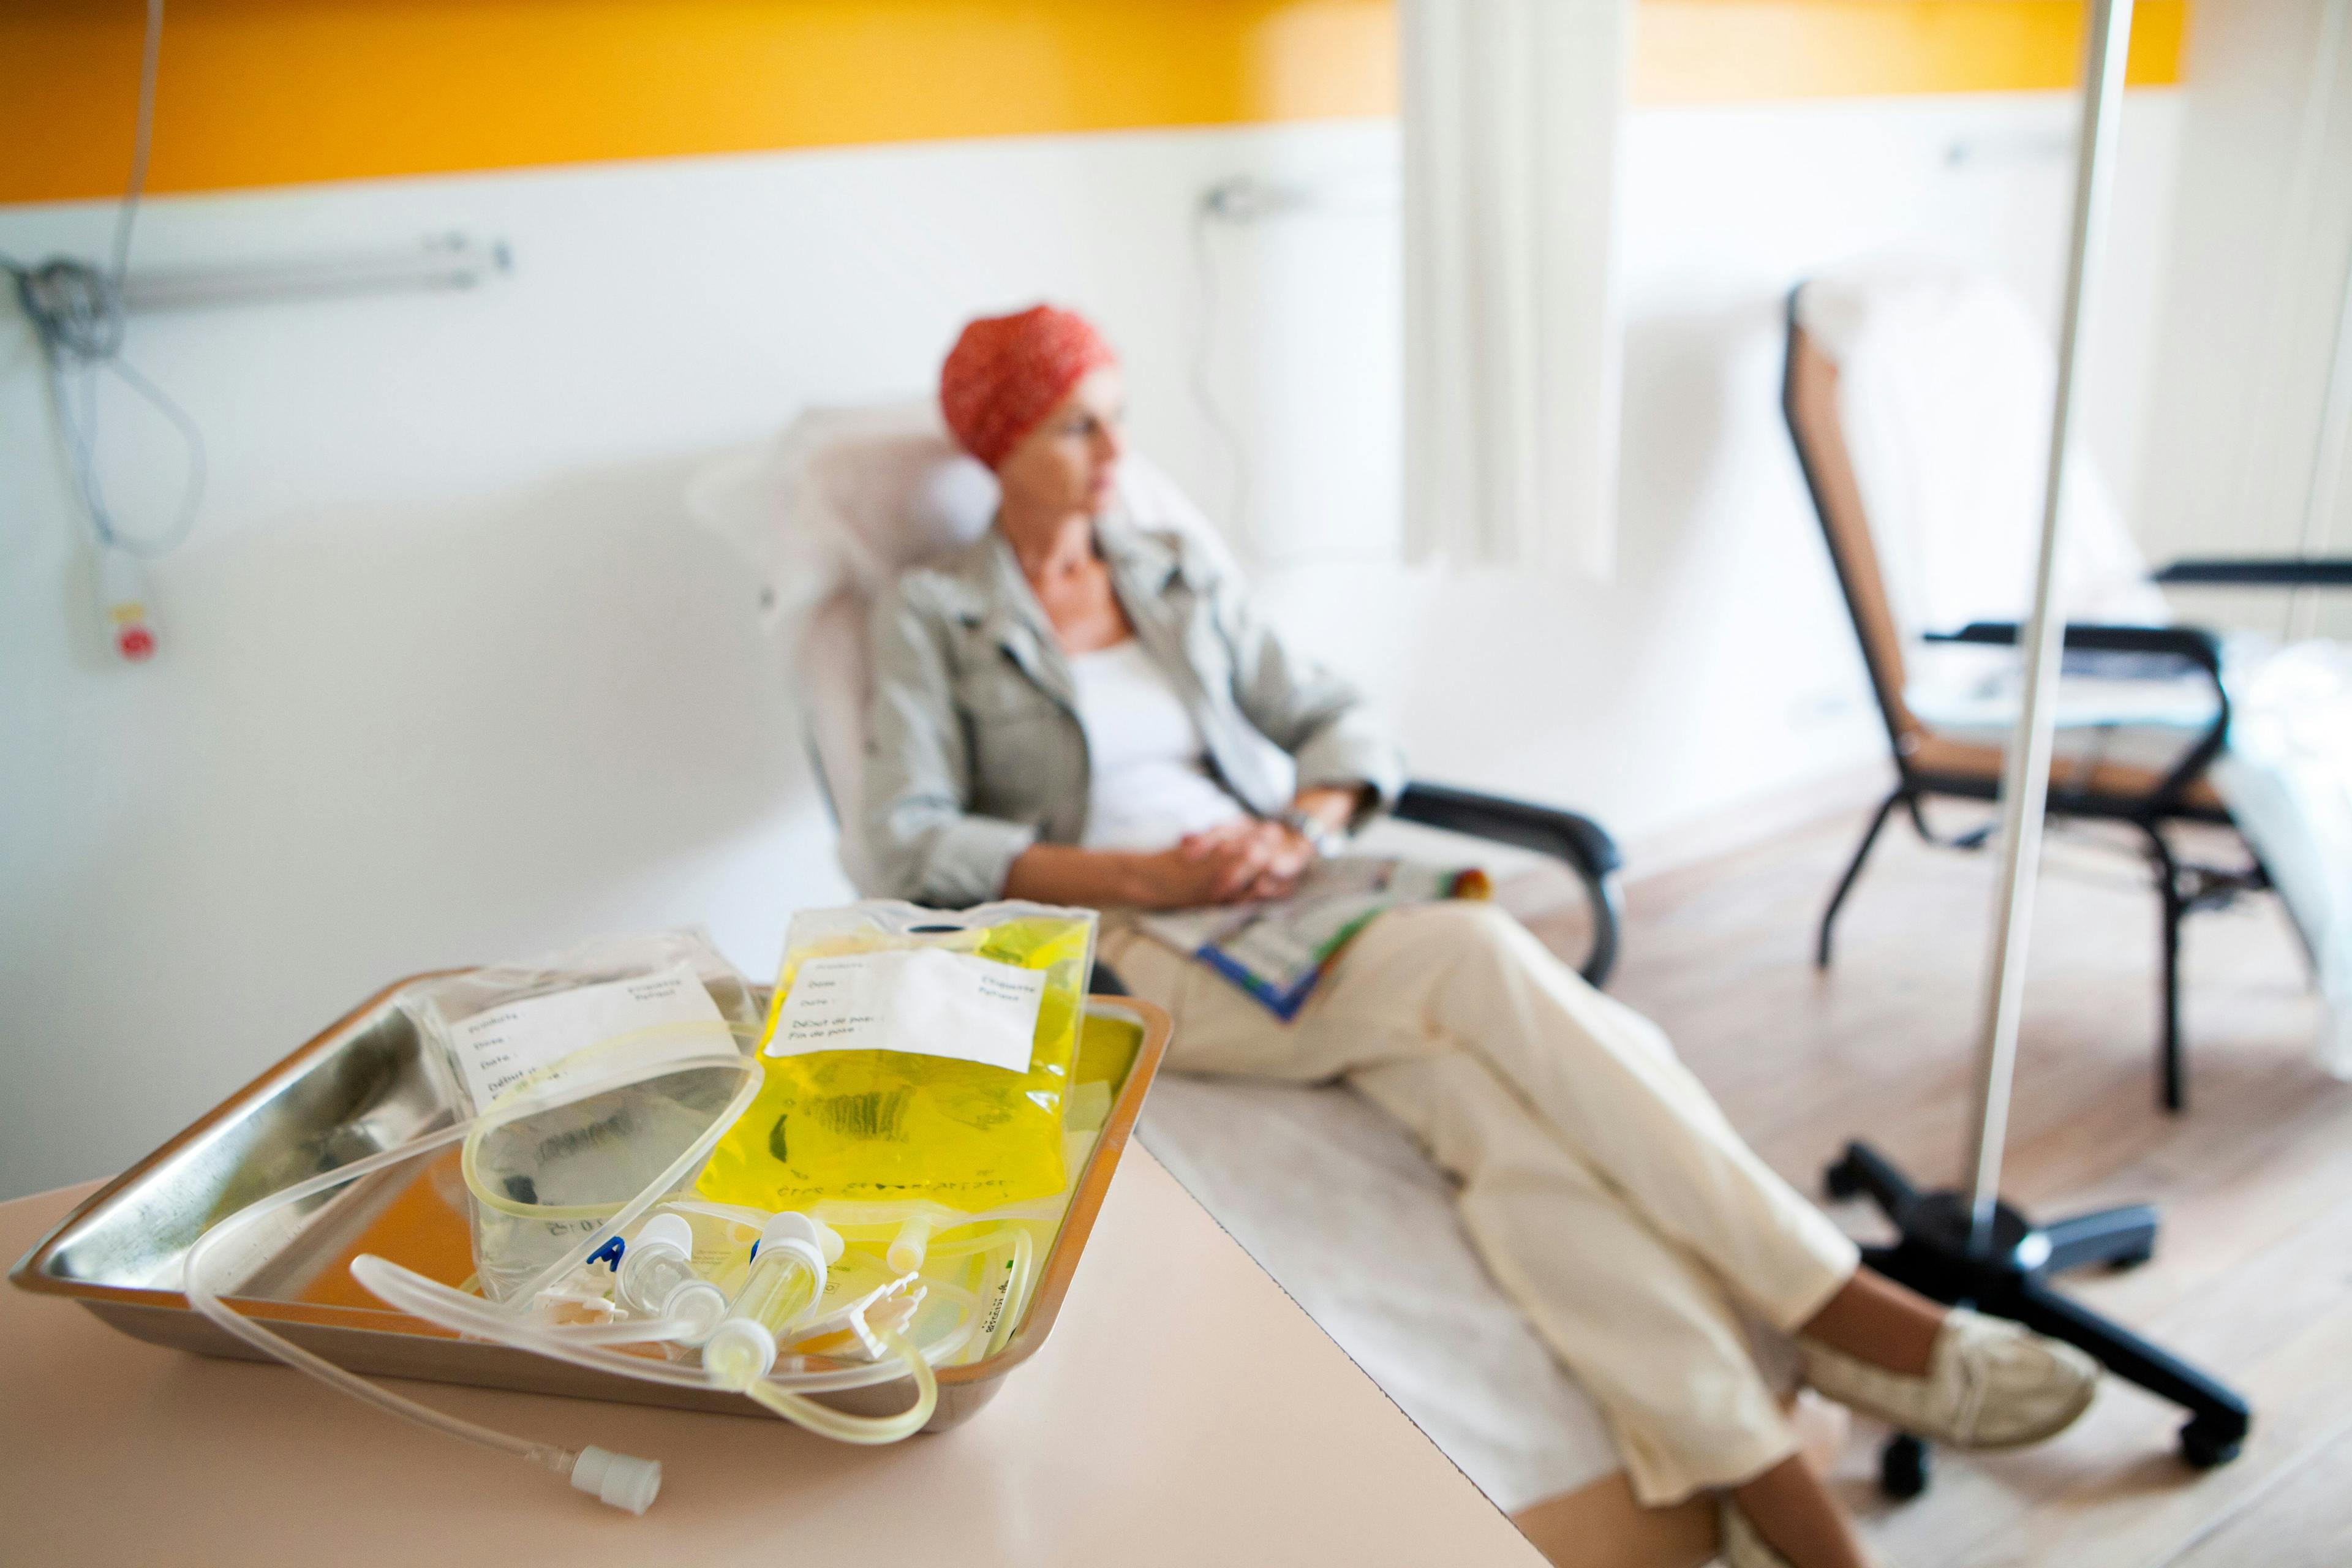 Person receiving cancer treatment | Image credit: RFBSIP - stock.adobe.com